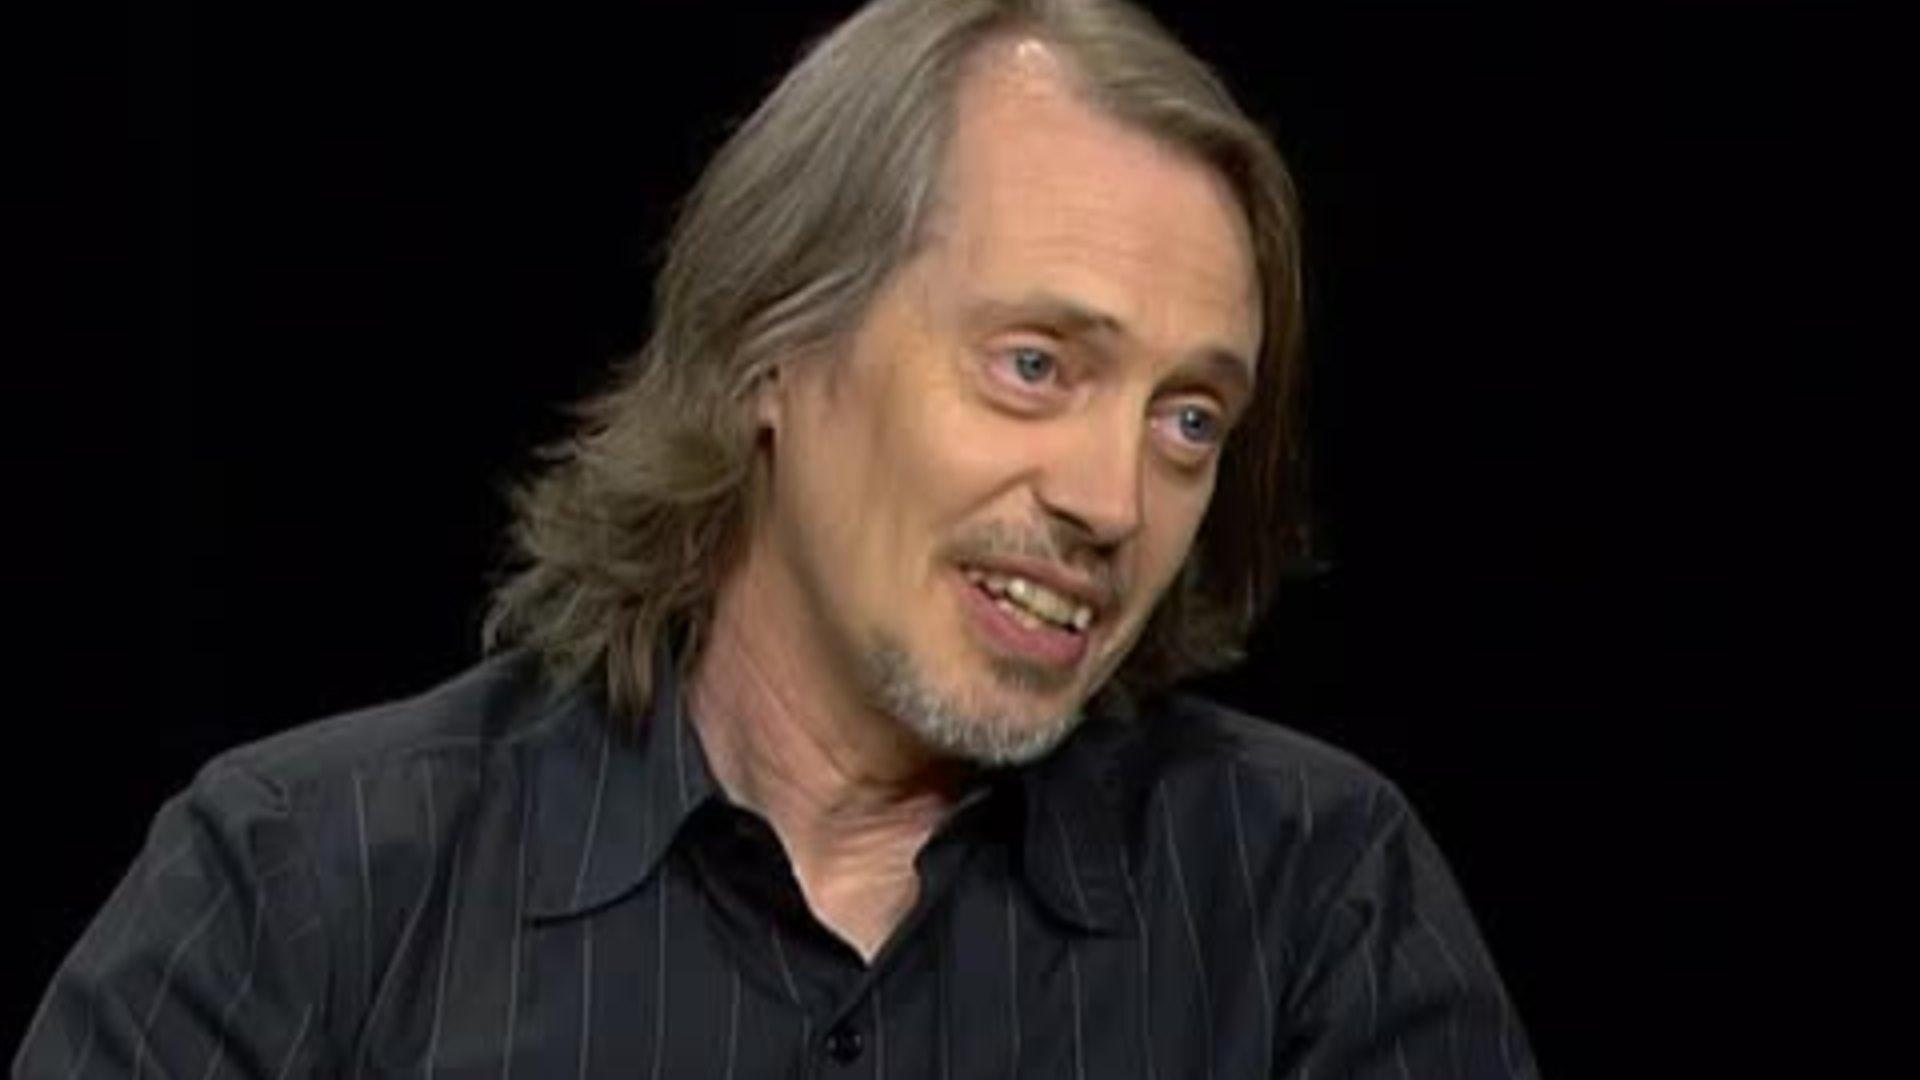 Steve Buscemi Tired of Being “Just Another Pretty Face, ” Ready to